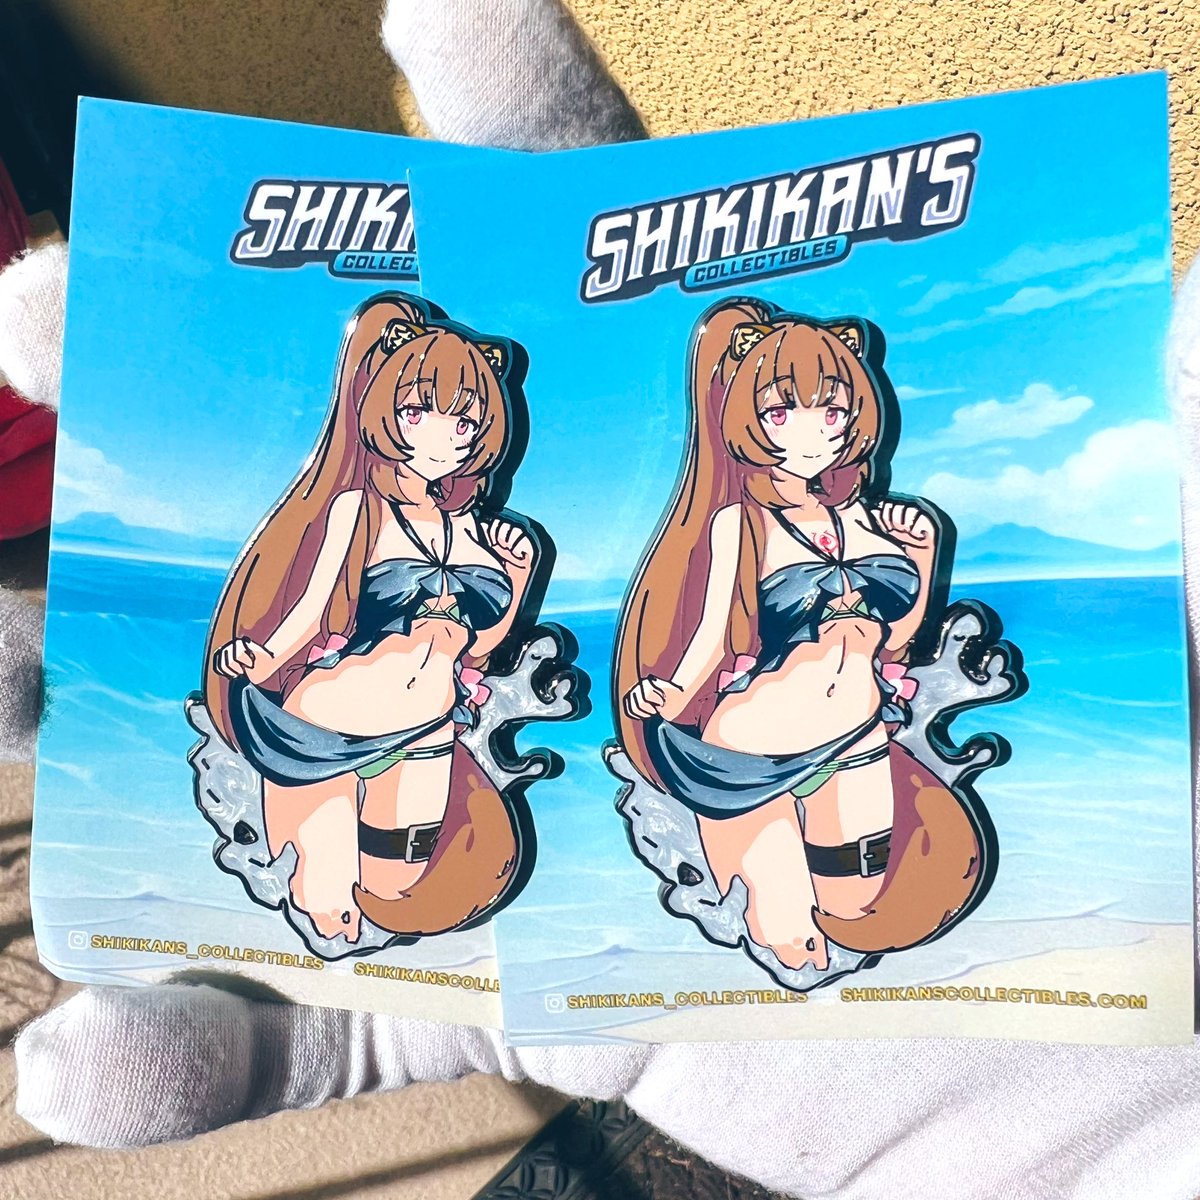 Offering a mix of gold or black nickel, glitter, pearl, no effect swimsuit, w/ or w/o slave crest

shikikanscollectibles.com/product/cute-r…

#raphtalia #enamelpins #shieldhero #shikikanscollectibles